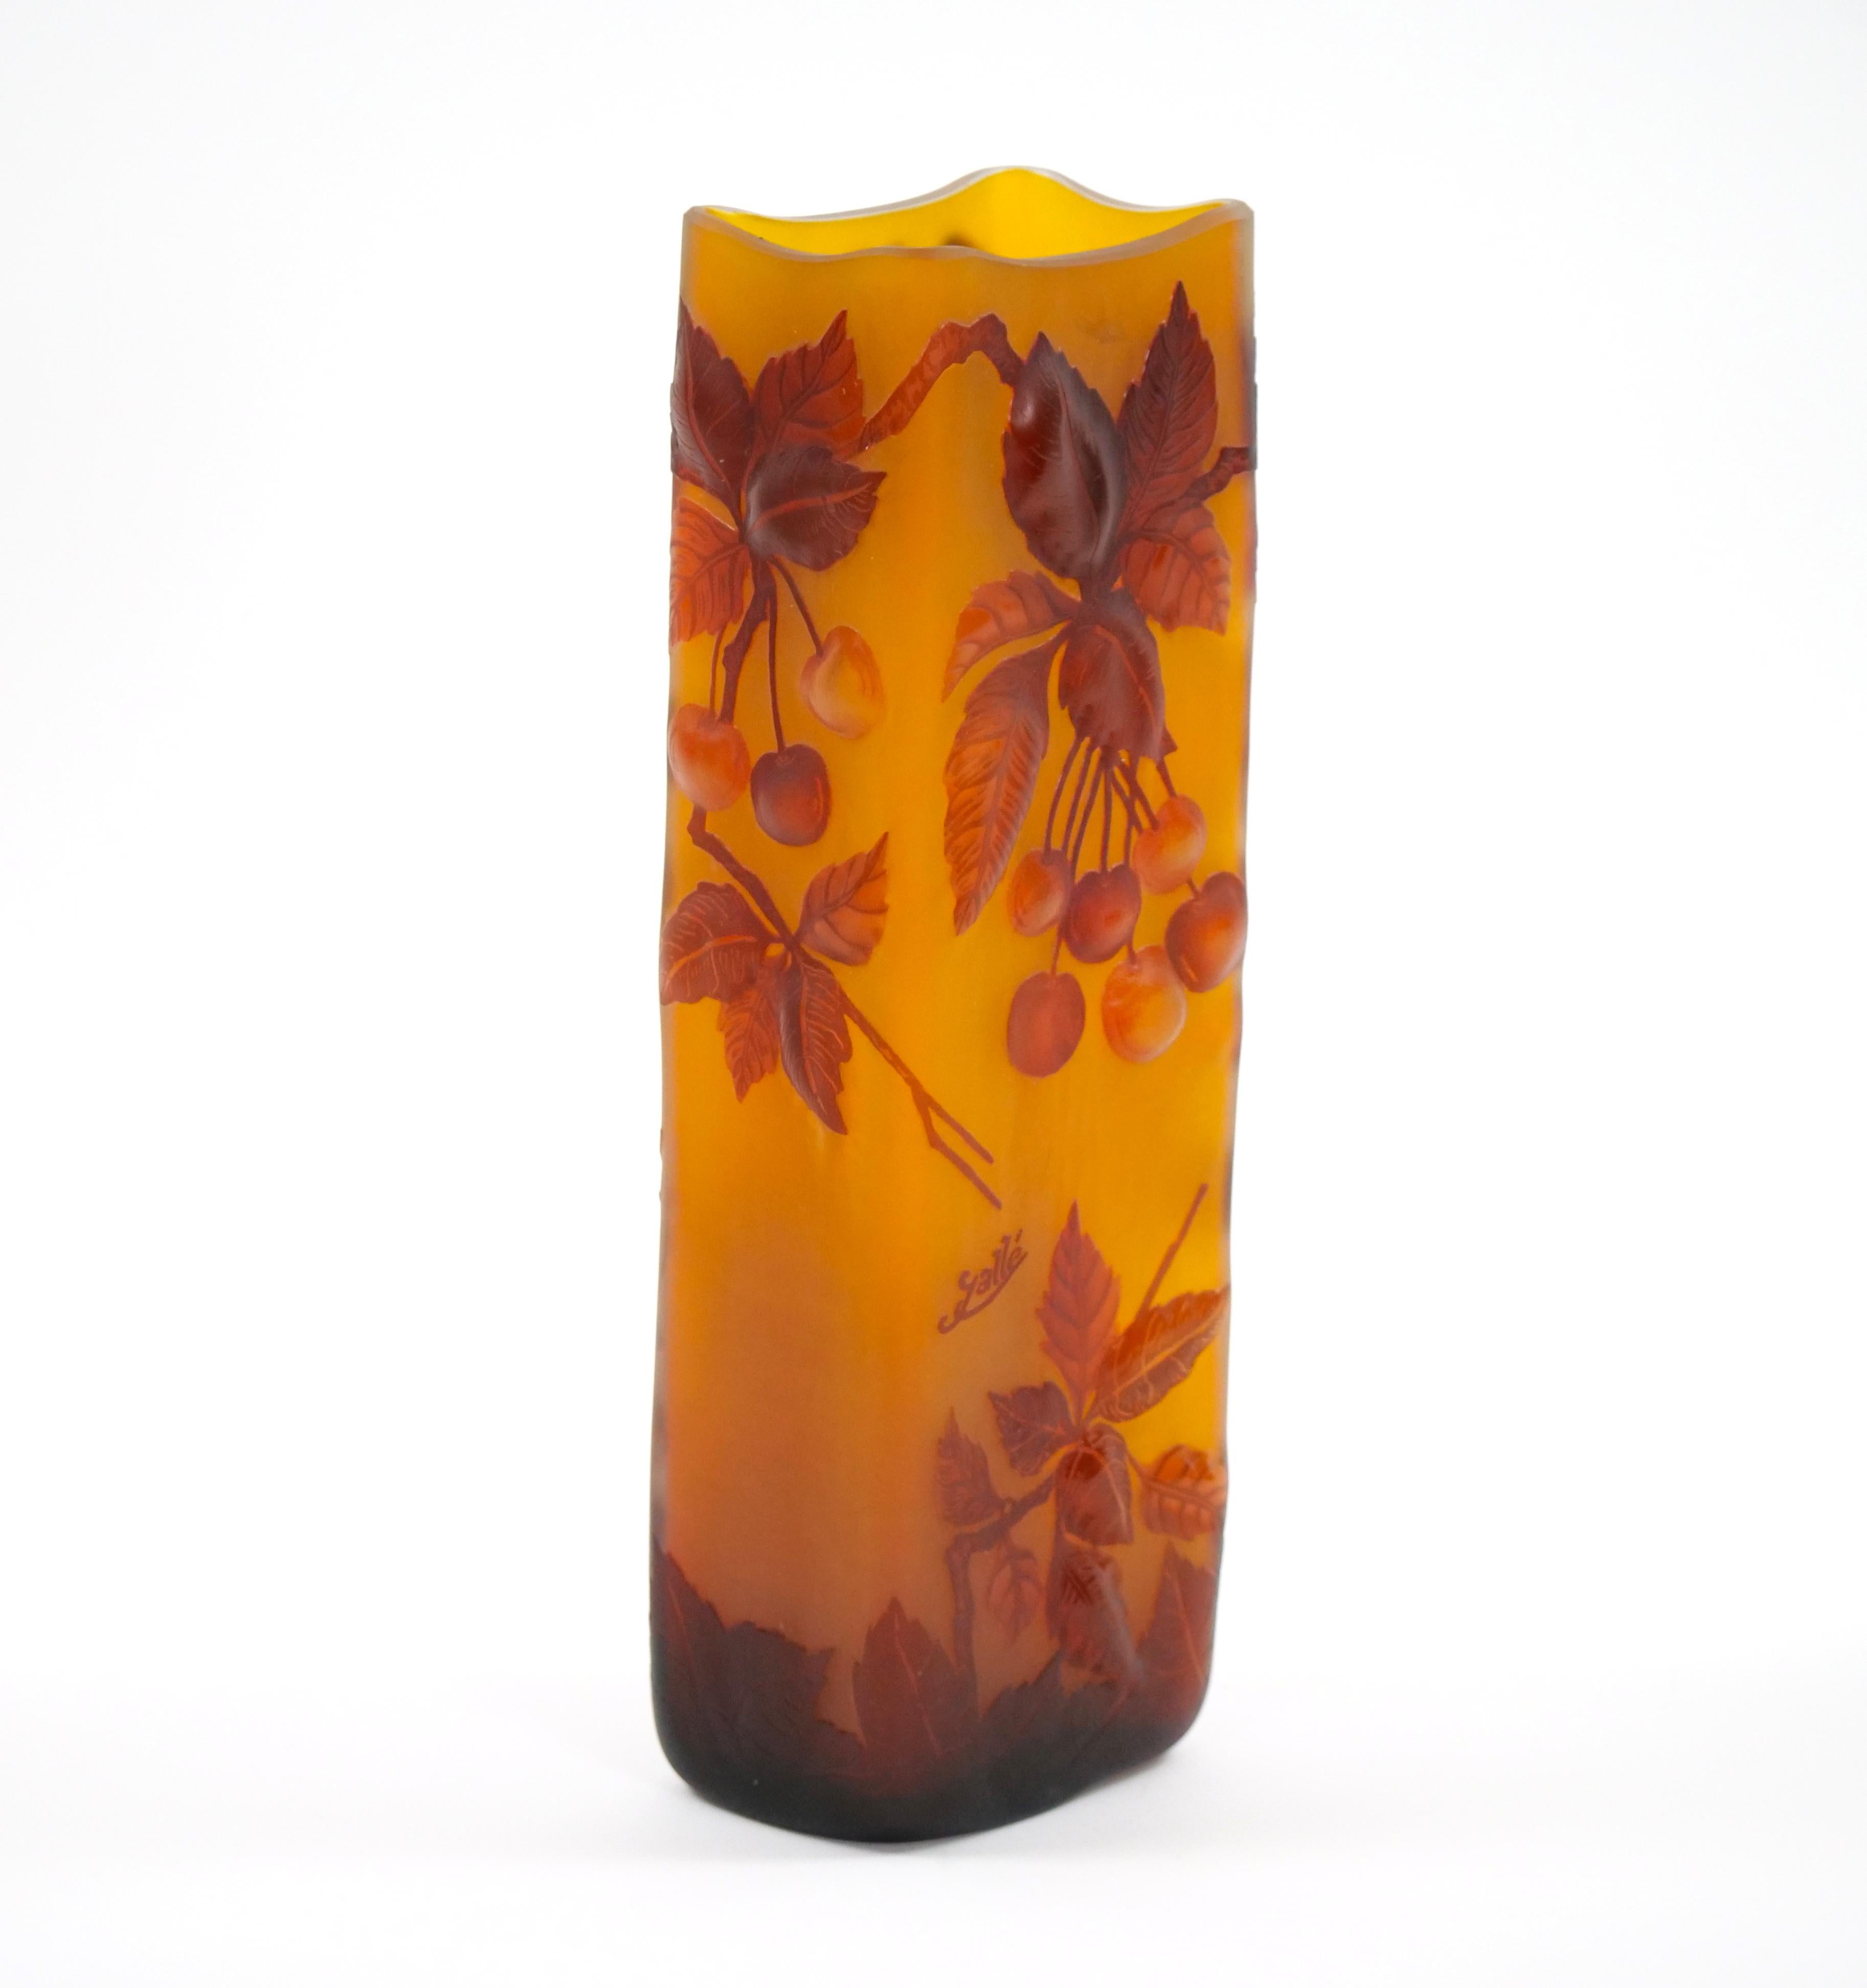 Elevate your space with the timeless beauty of an Emile Galle square-shaped cameo glass decorative vase. This masterpiece portrays the graceful imagery of grapes and flowering vines, rendered in rich red hues against a warm amber ground. Emile